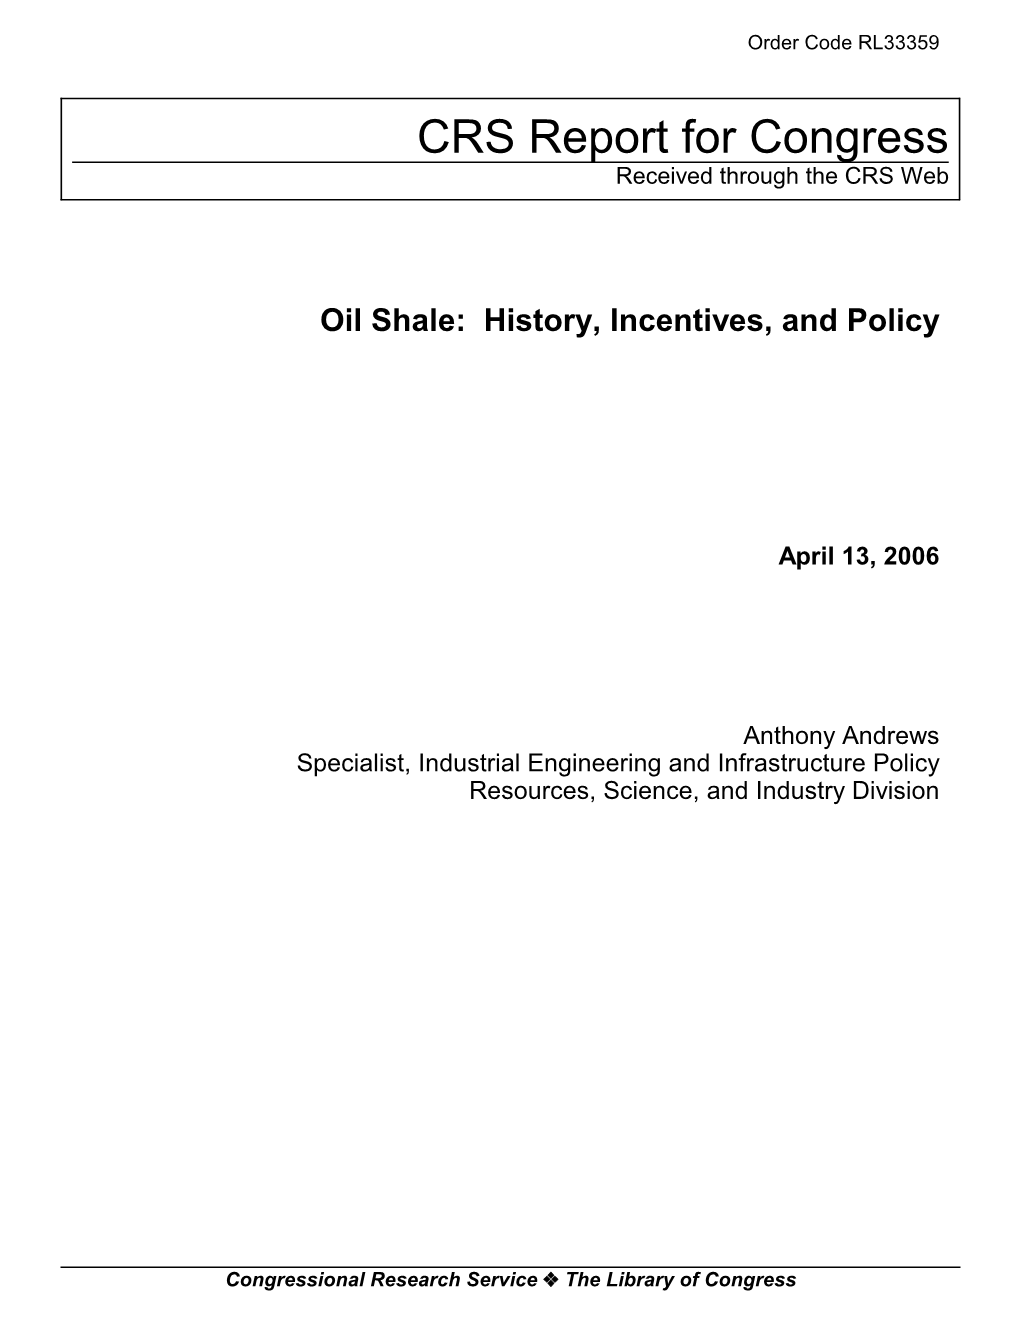 Oil Shale: History, Incentives, and Policy